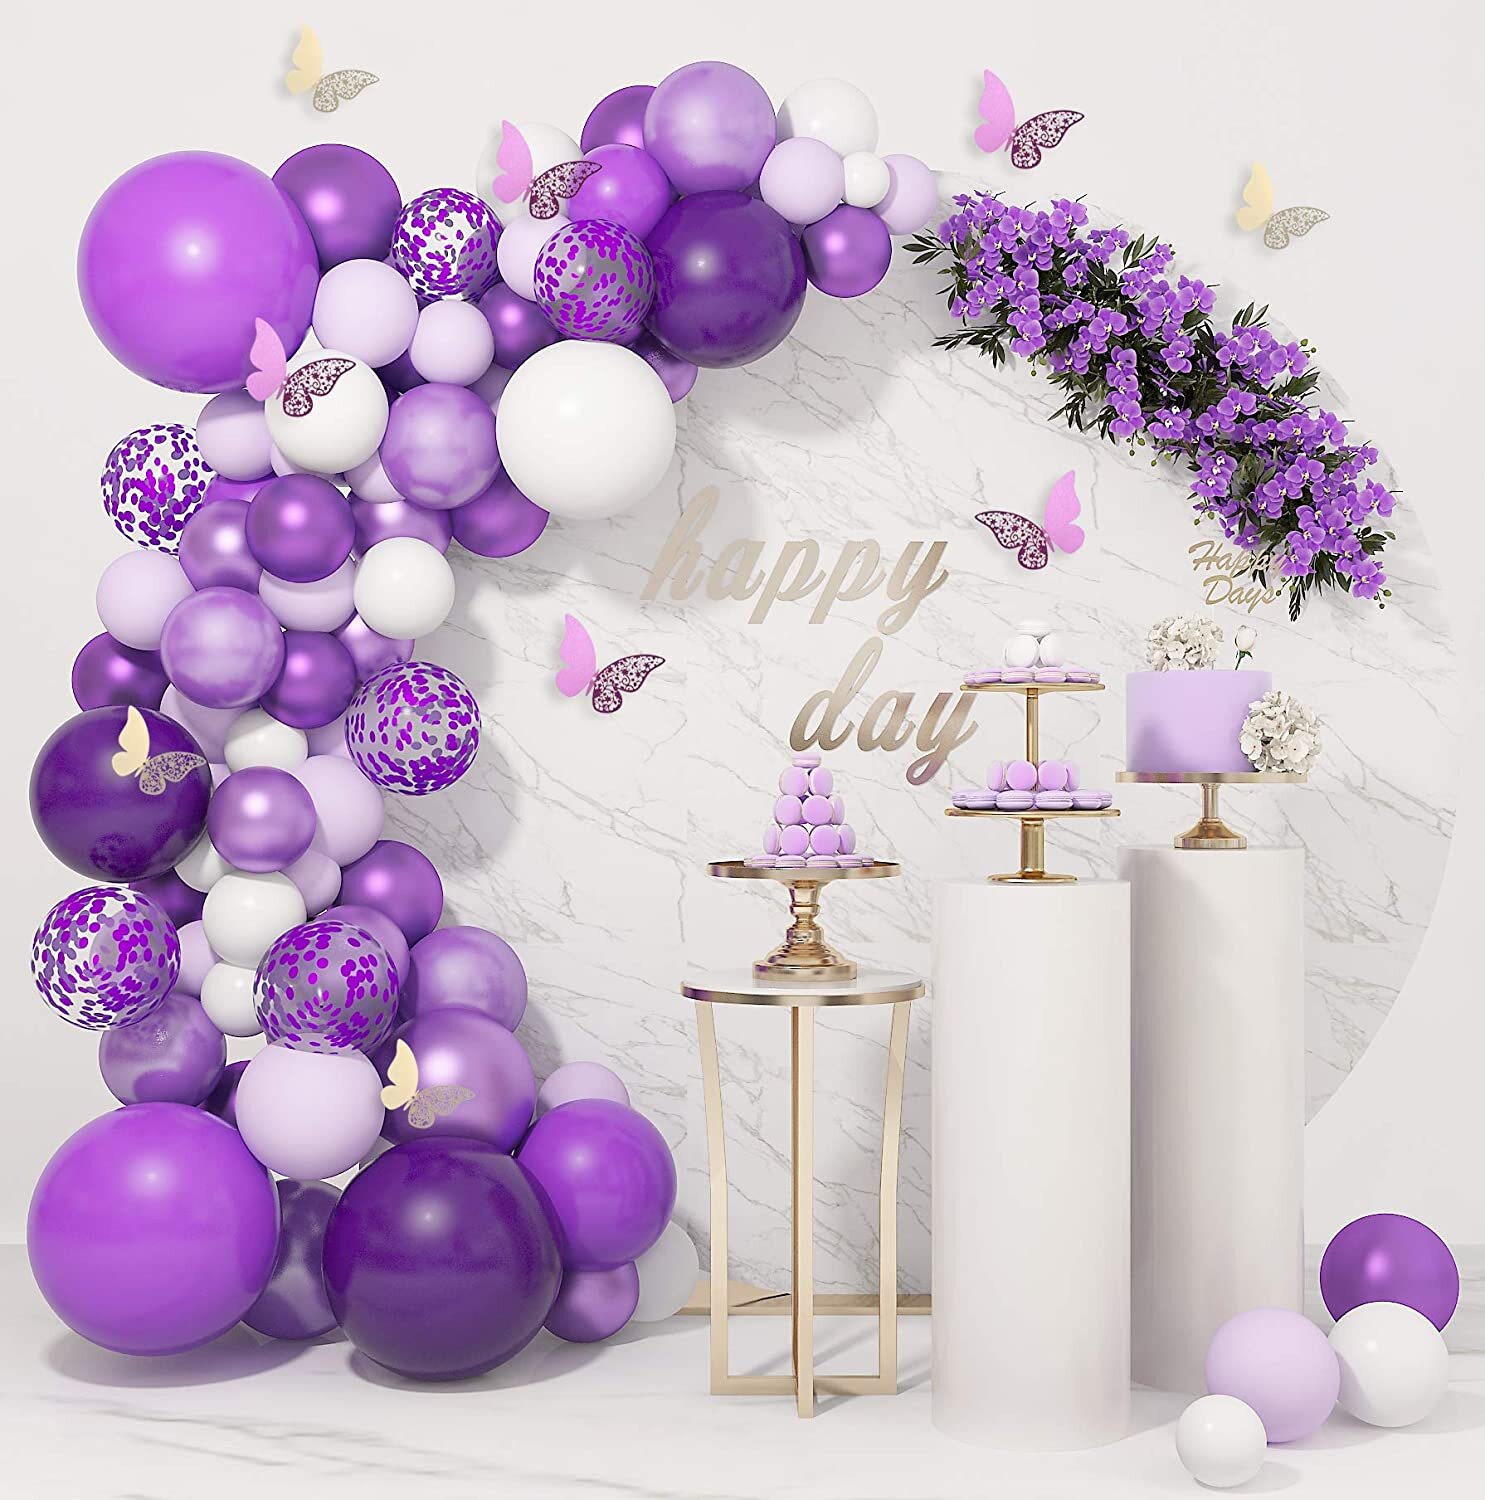 10x 5'' Violet tissue paper pom poms gift garland table wedding party decoration